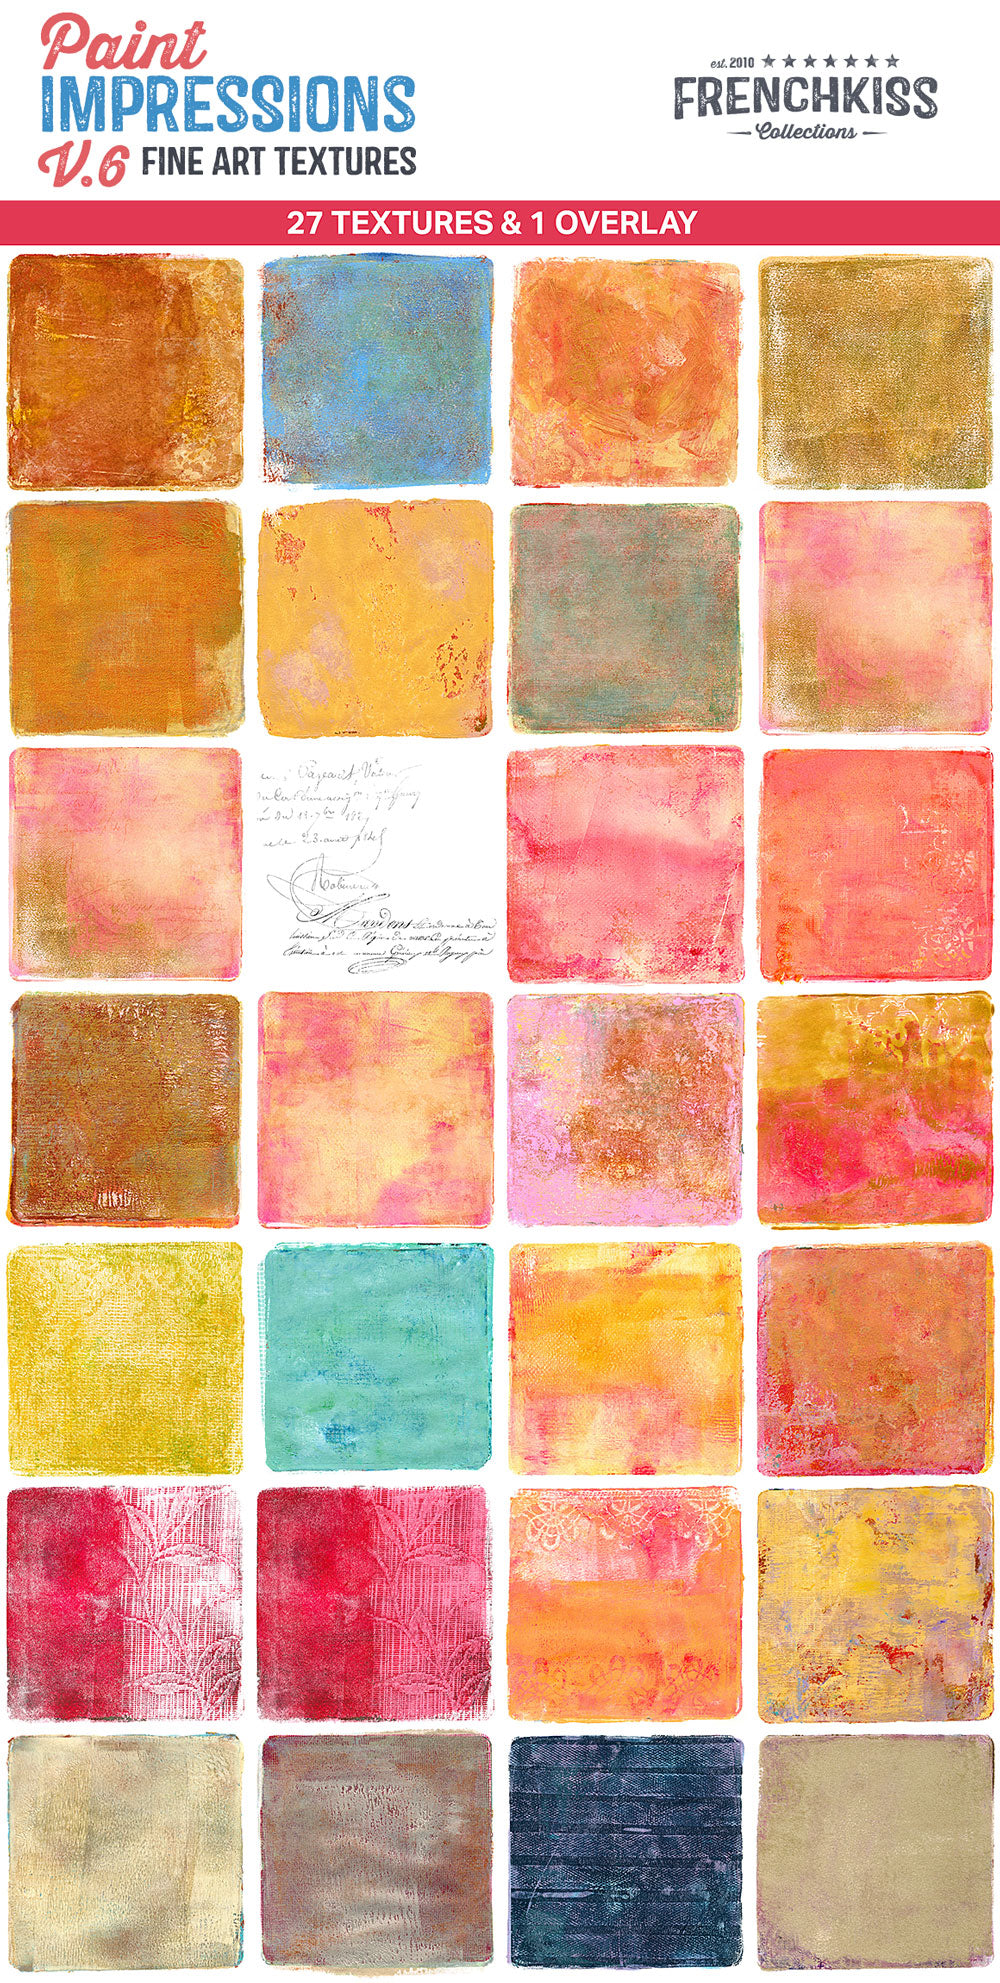 Fine art textures created from original paint monotypes. High resolution painterly textures with artistic edges. Commercial license.